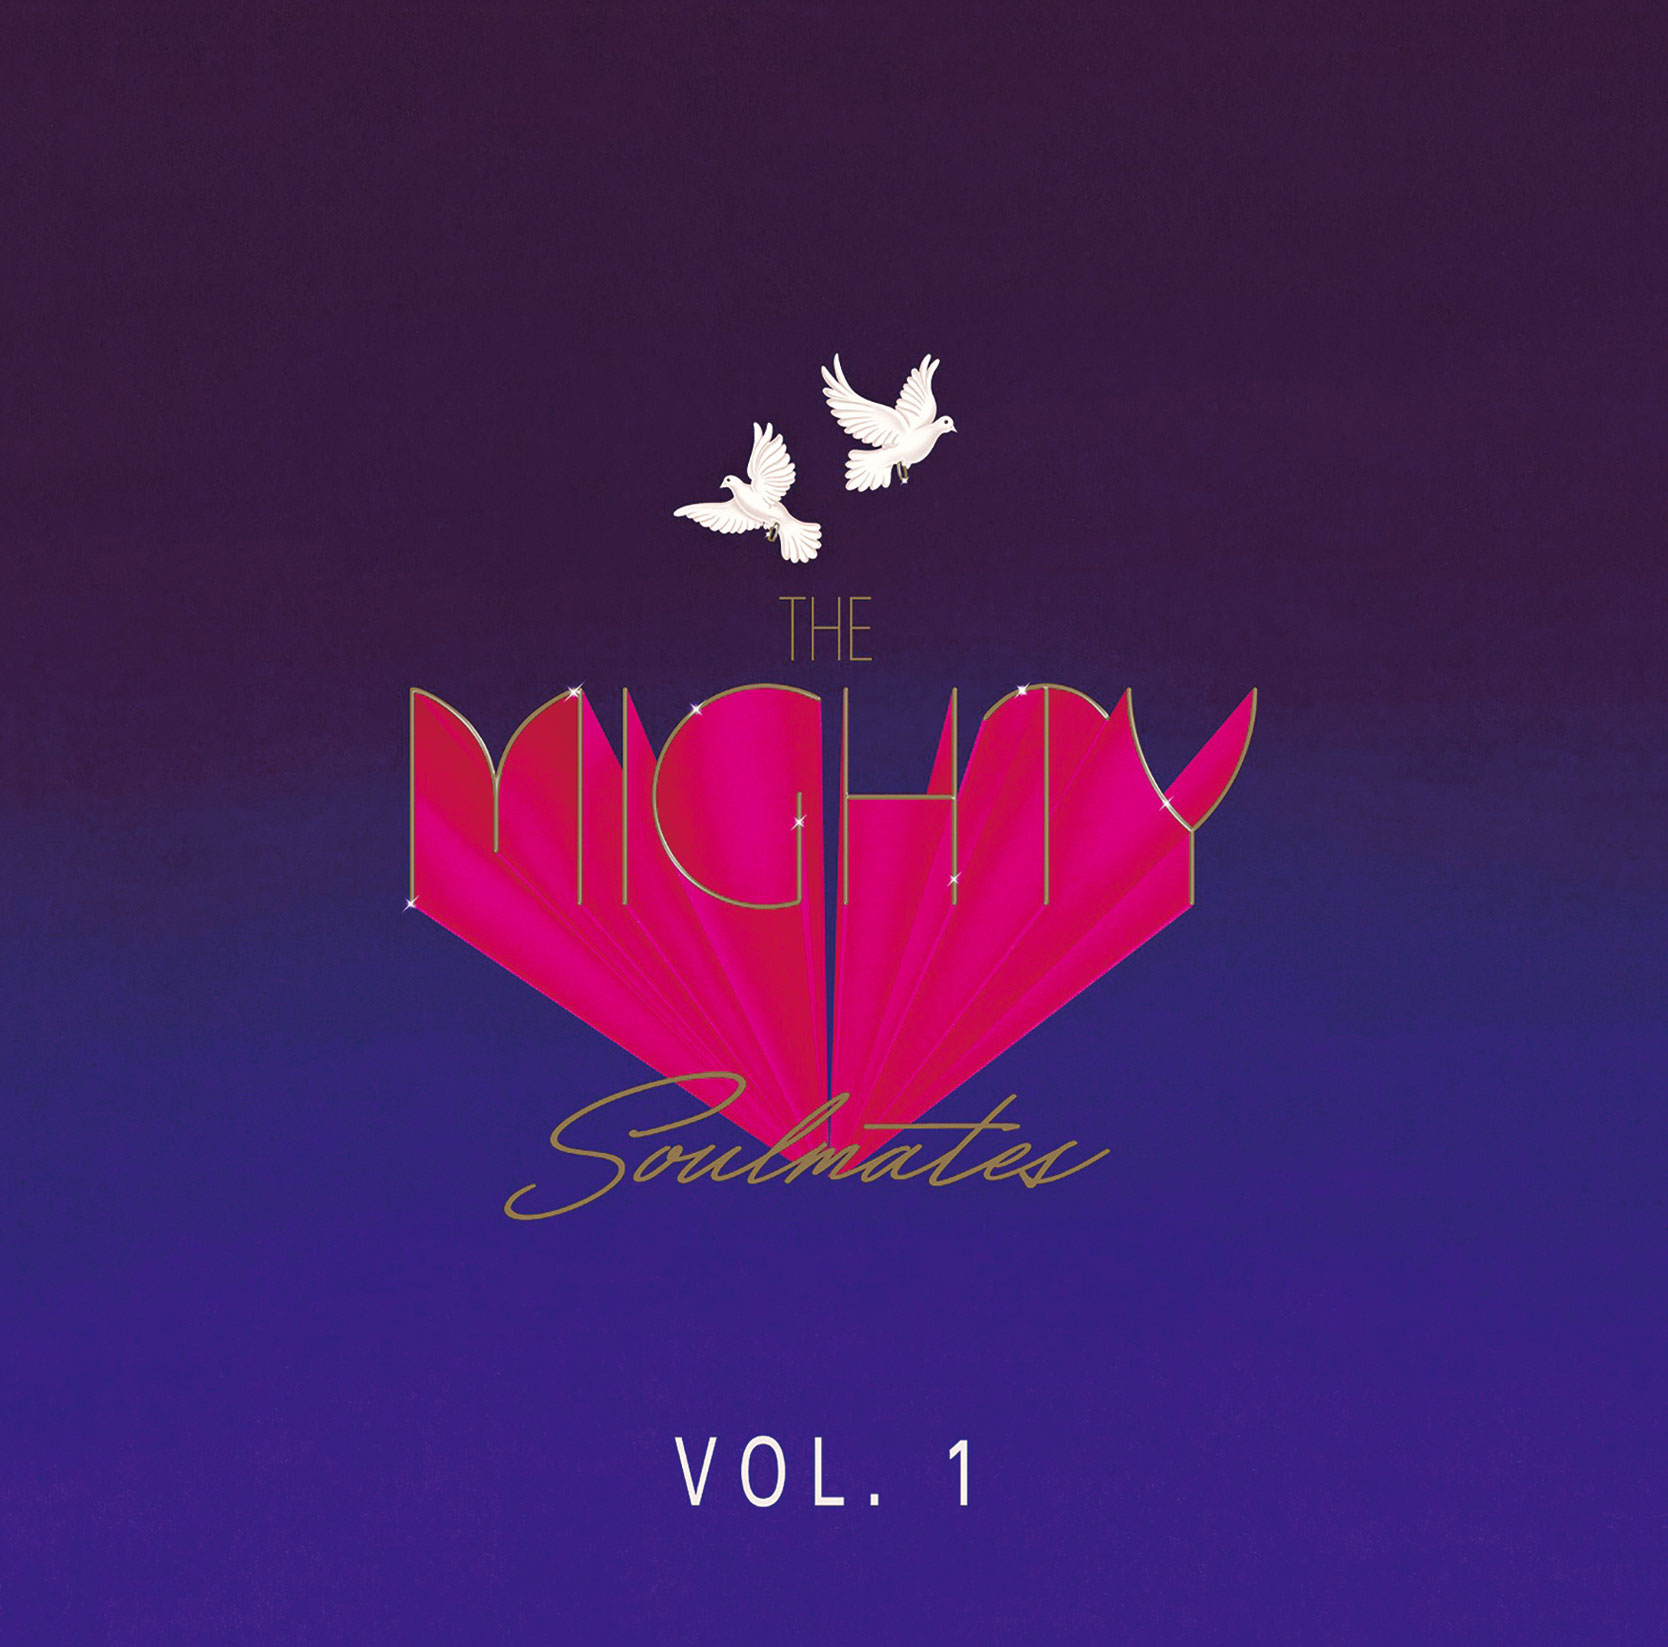 THE MIGHTY SOULMATES「Vol. 1」